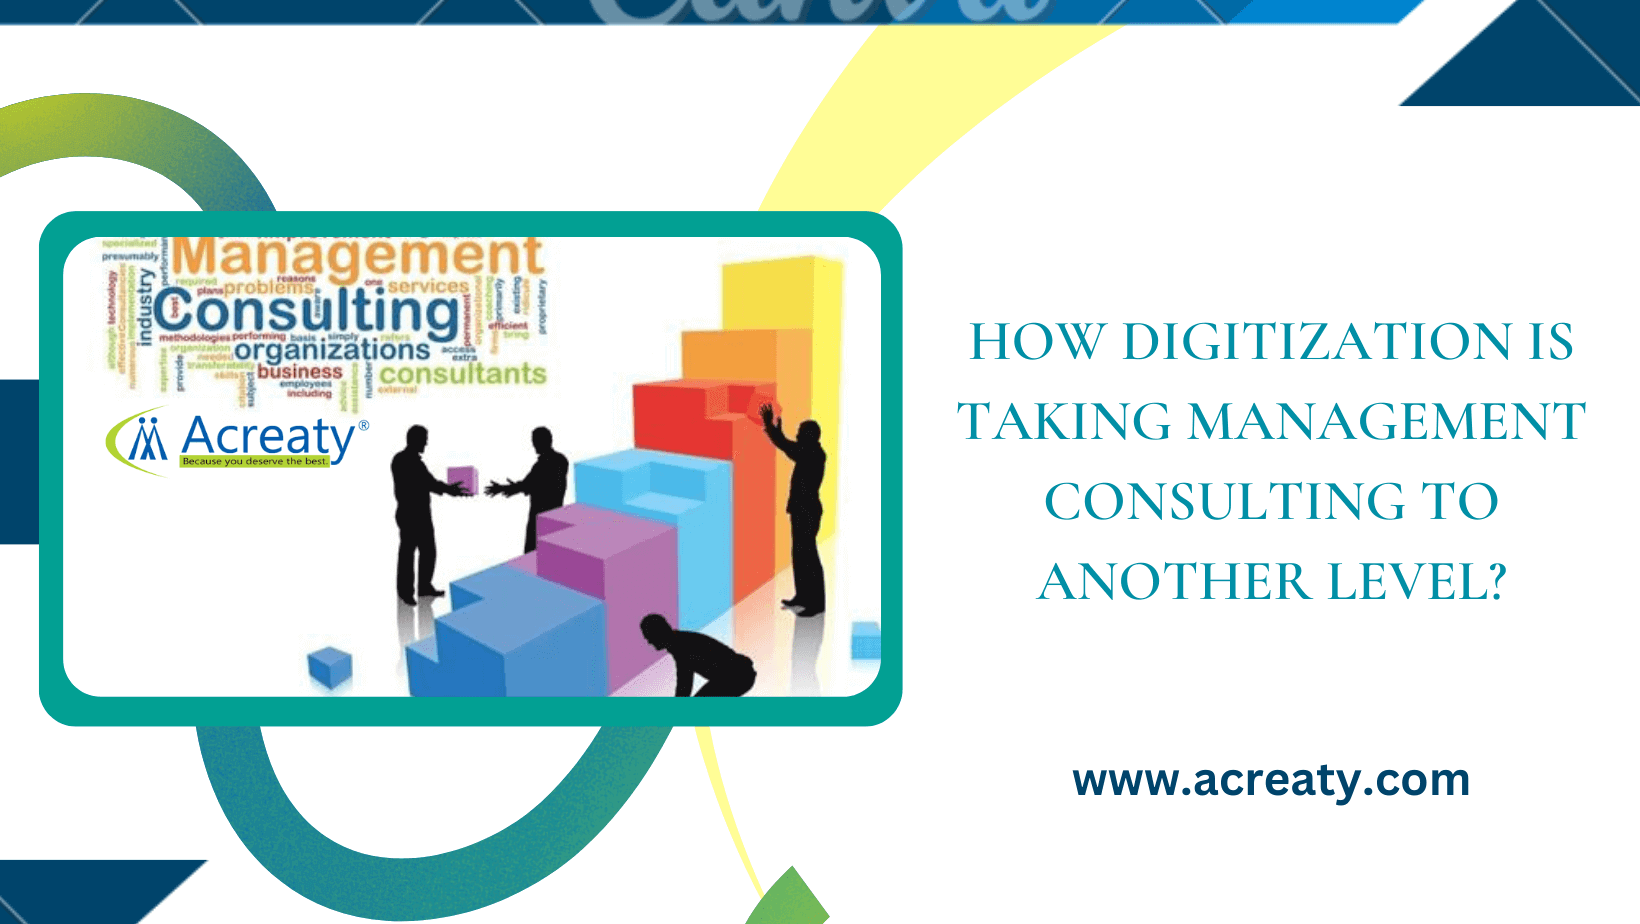 How Digitization is taking Management Consulting to another Level?